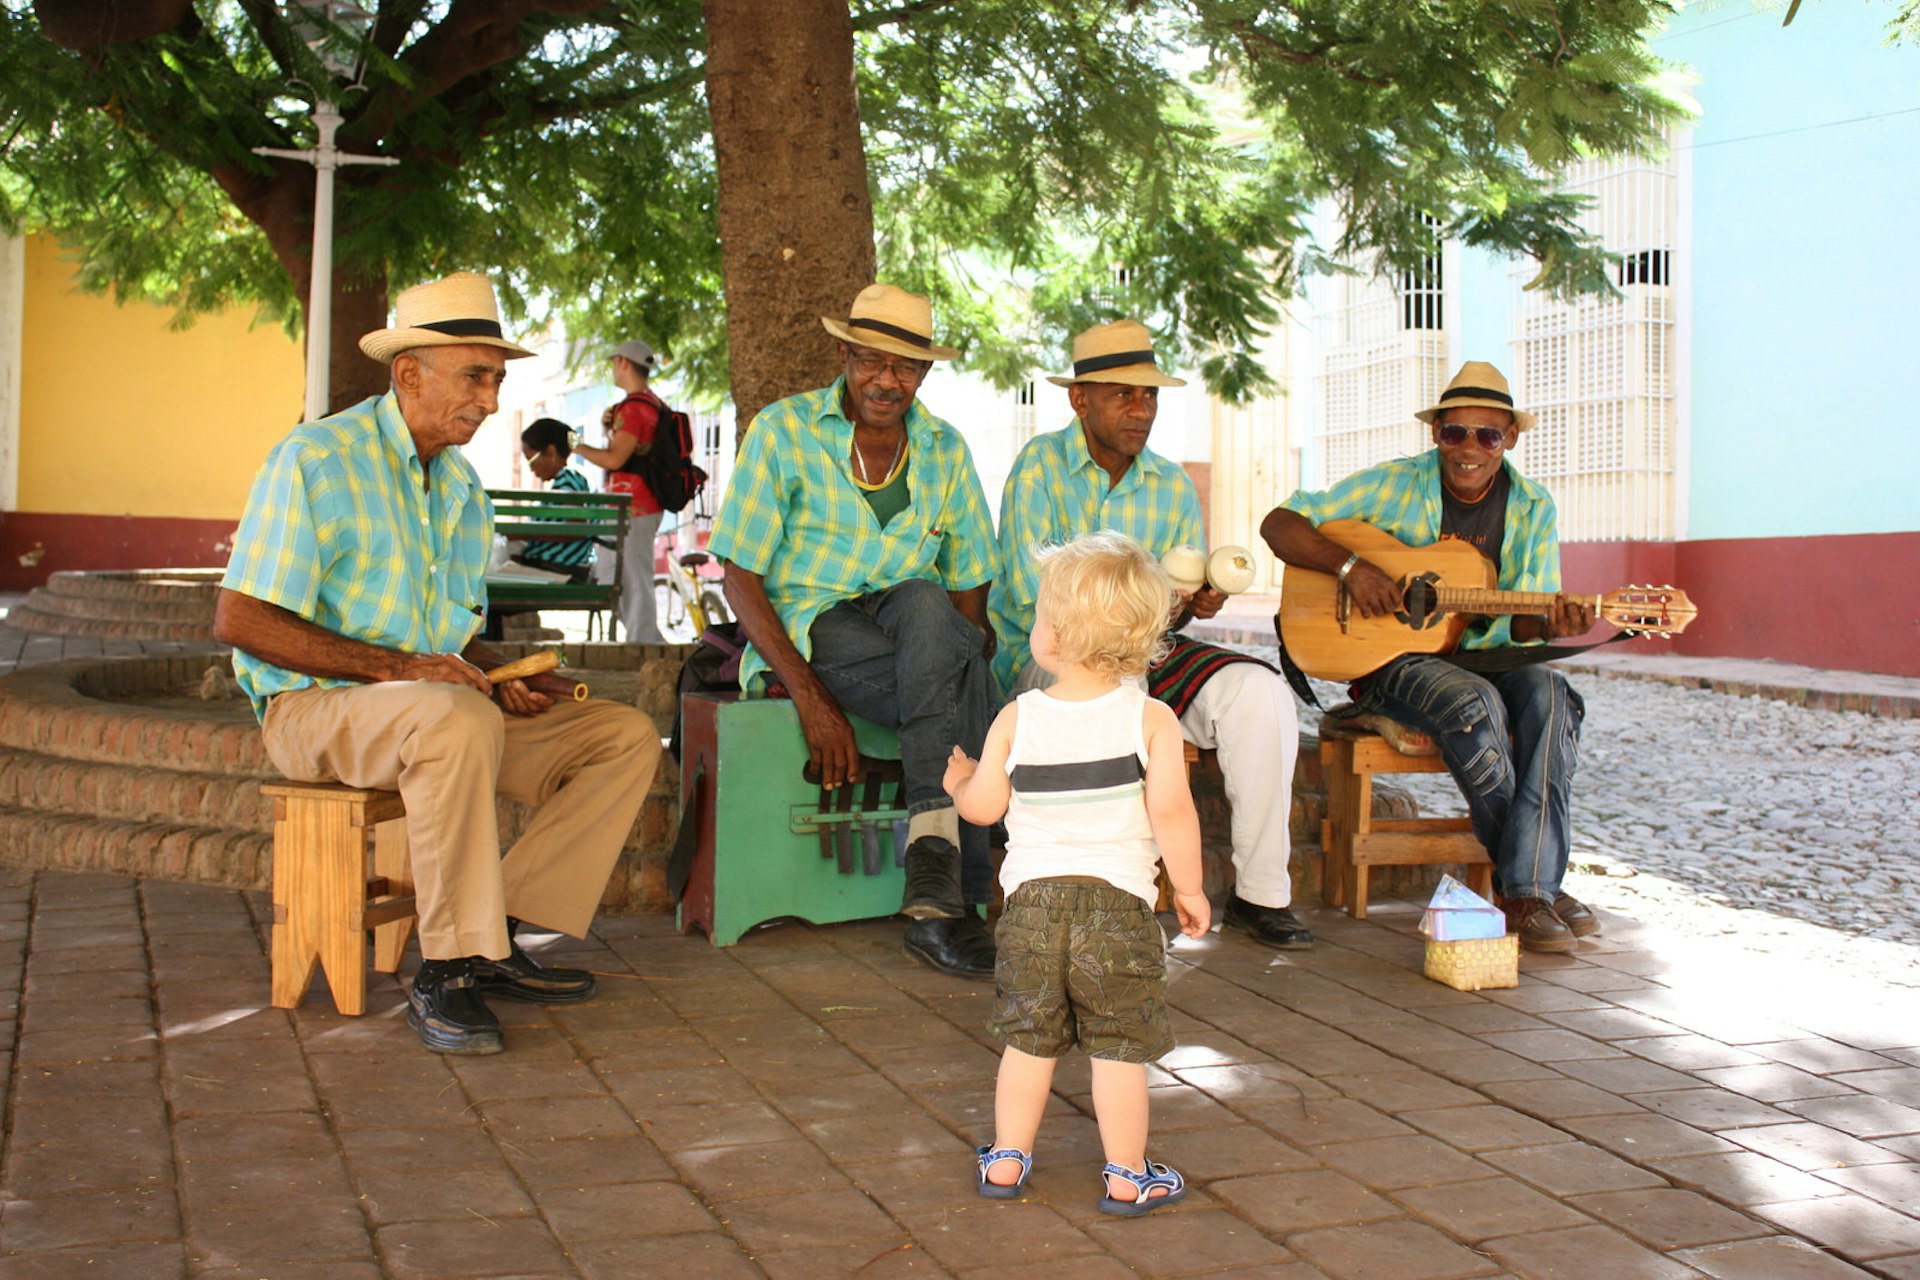 Family travel myths: Too hot? Seeking out shade (and street entertainment) can do wonders © Lorna Parkes / Lonely Planet